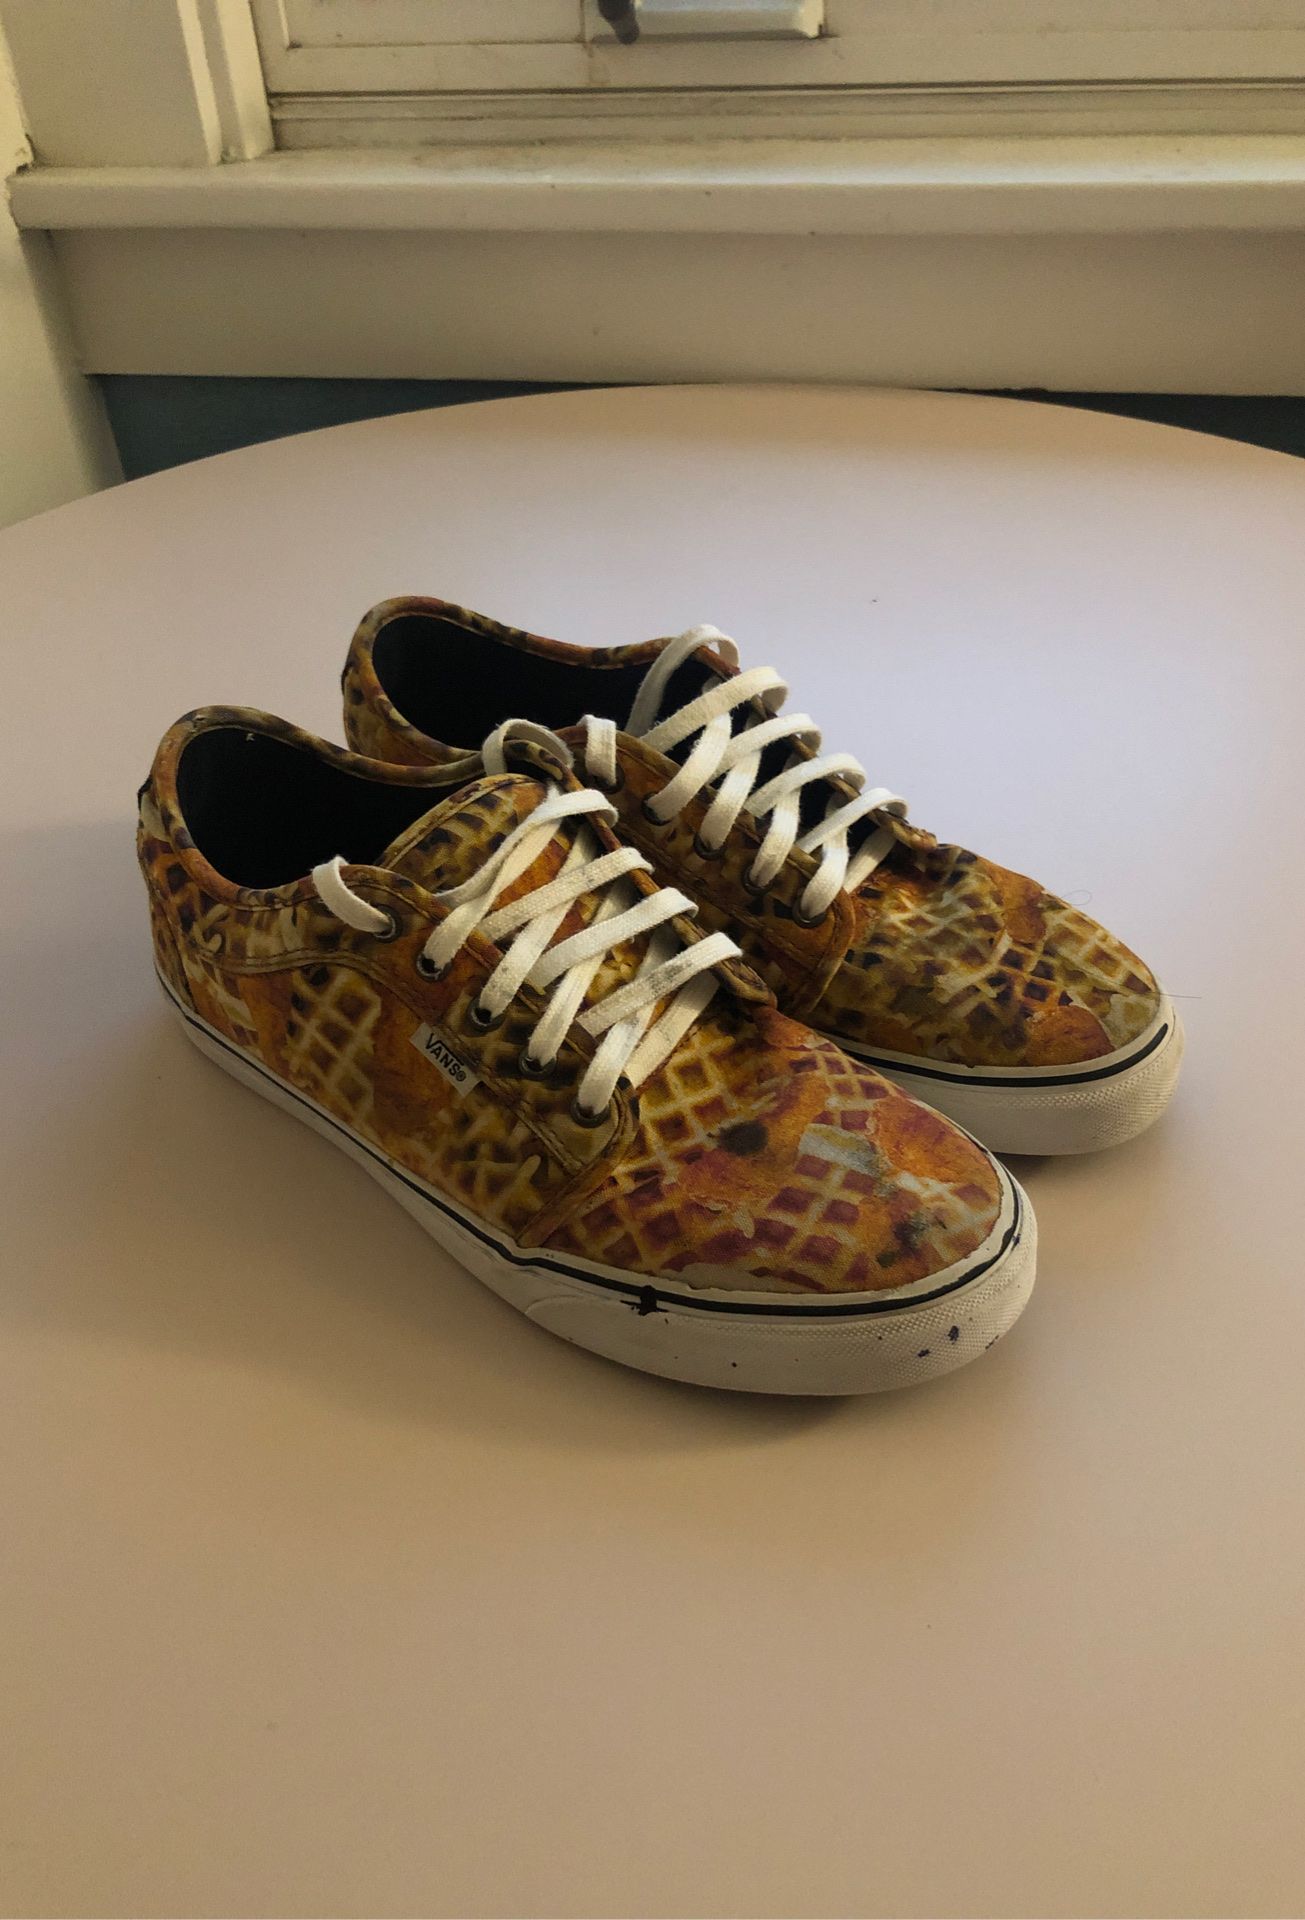 VANS CHUKKA LOW CHICKEN AND WAFFLE SIZE 9.5